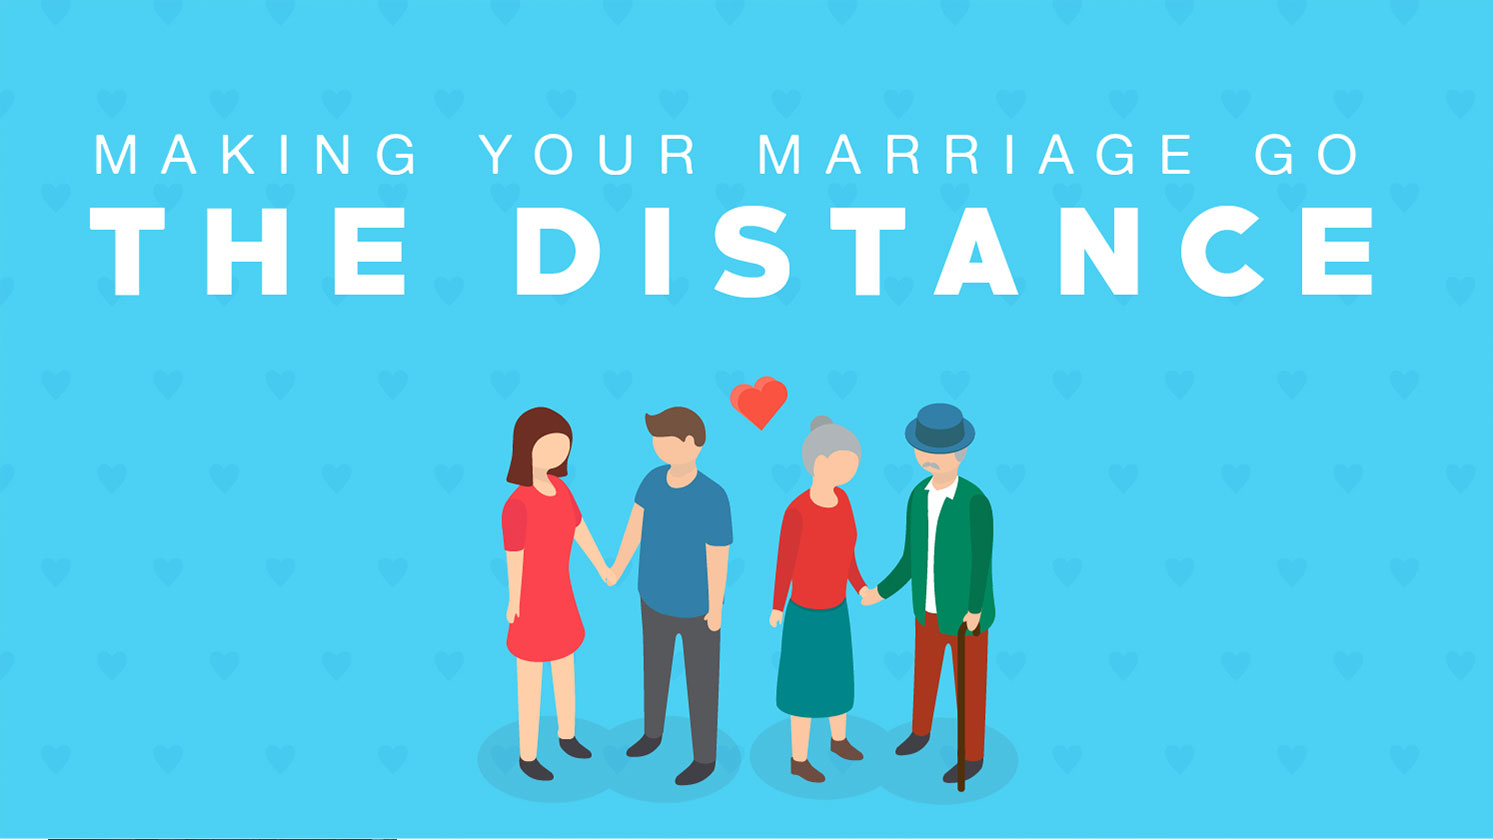 Making Your Marriage Go the Distance